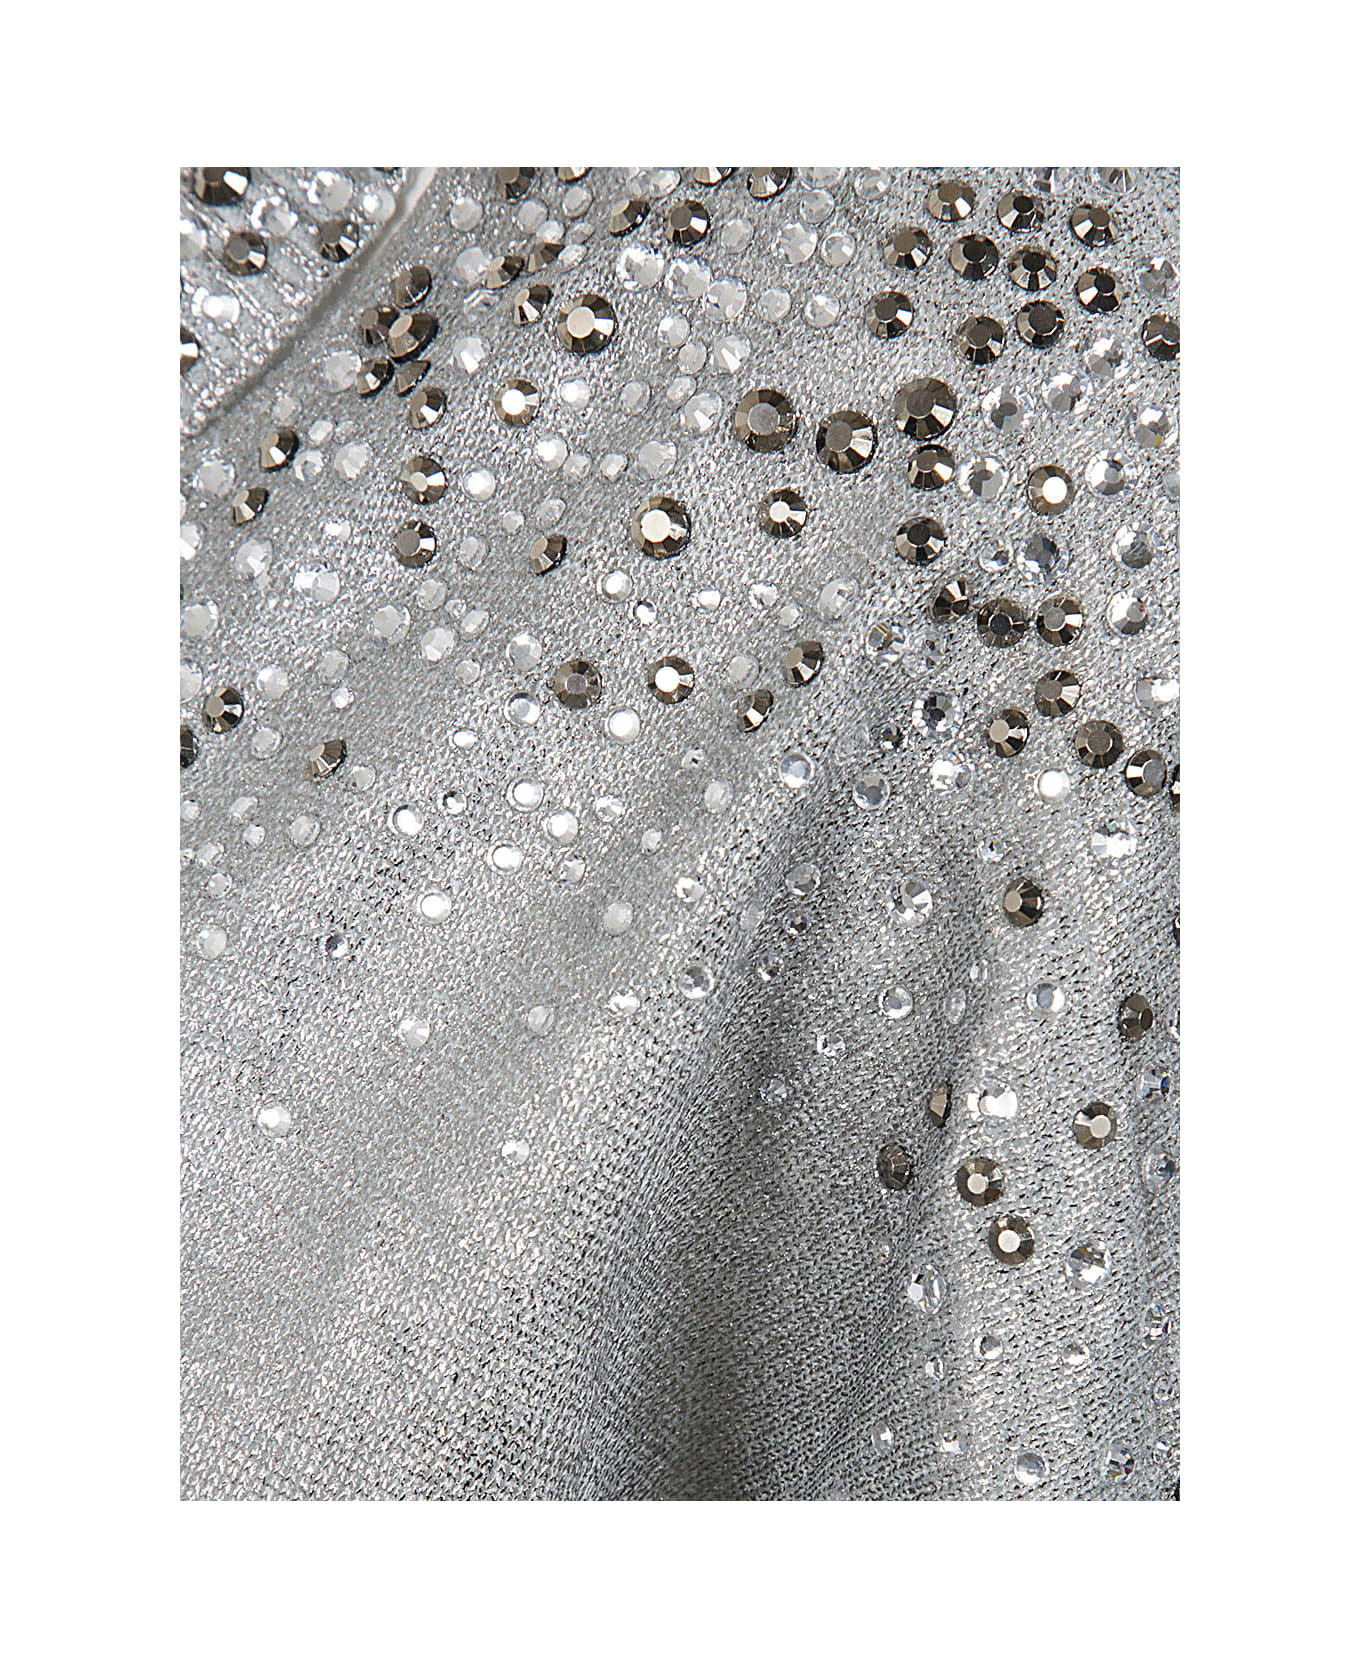 Avant Toi Linen Cotton V-neck Pullover With Lamination And Strass - Ice